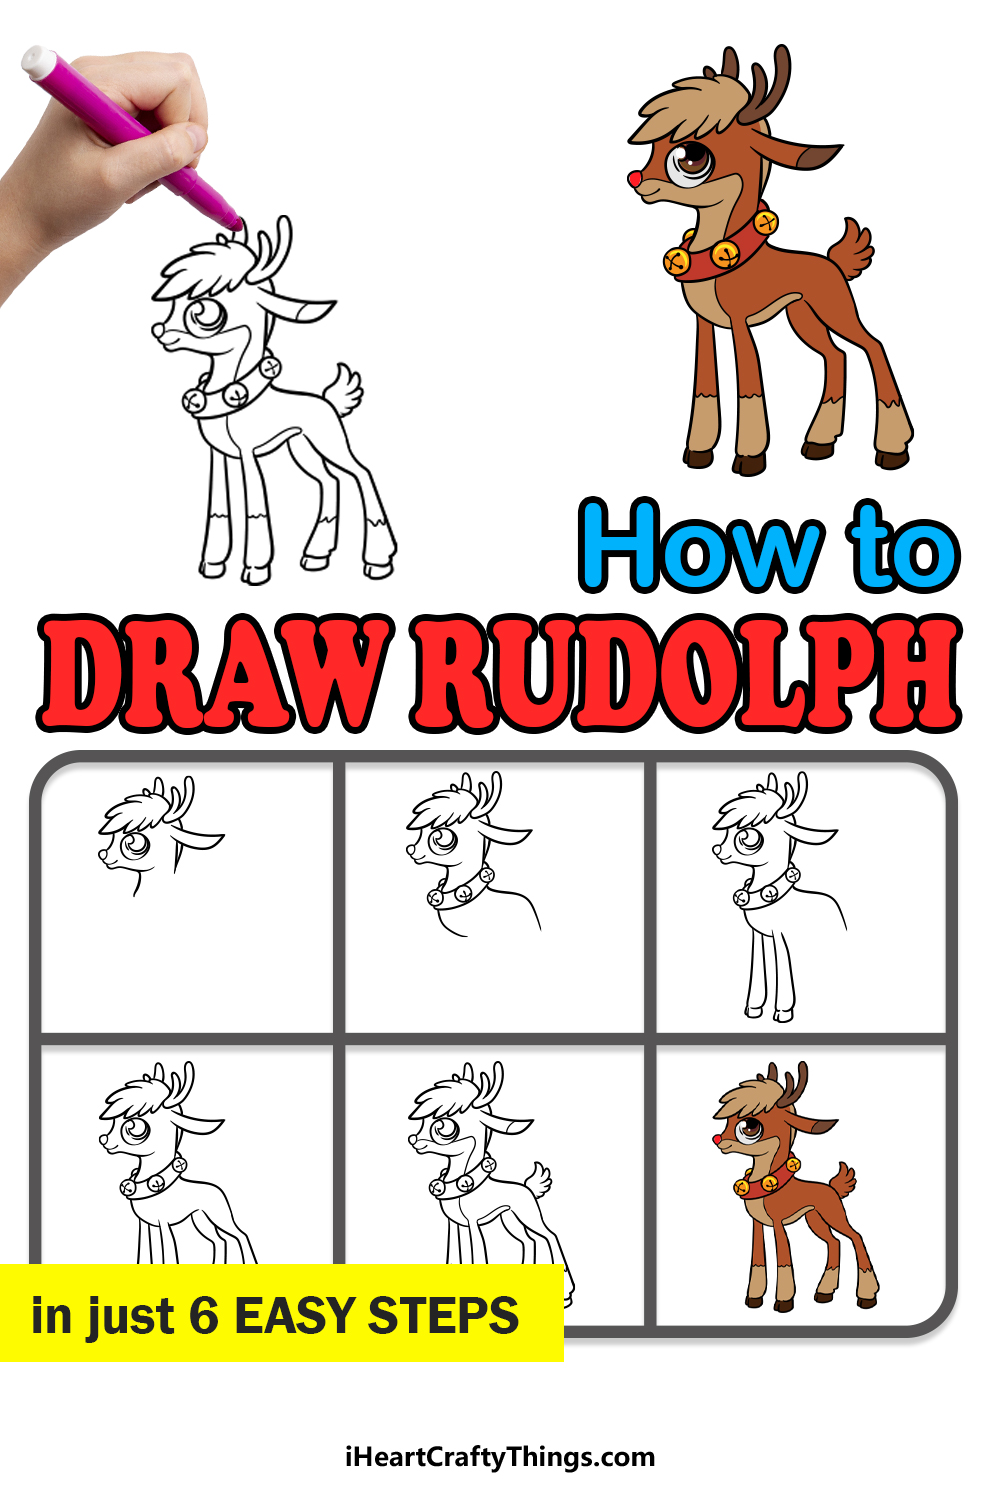 how to draw Rudolph in 6 easy steps